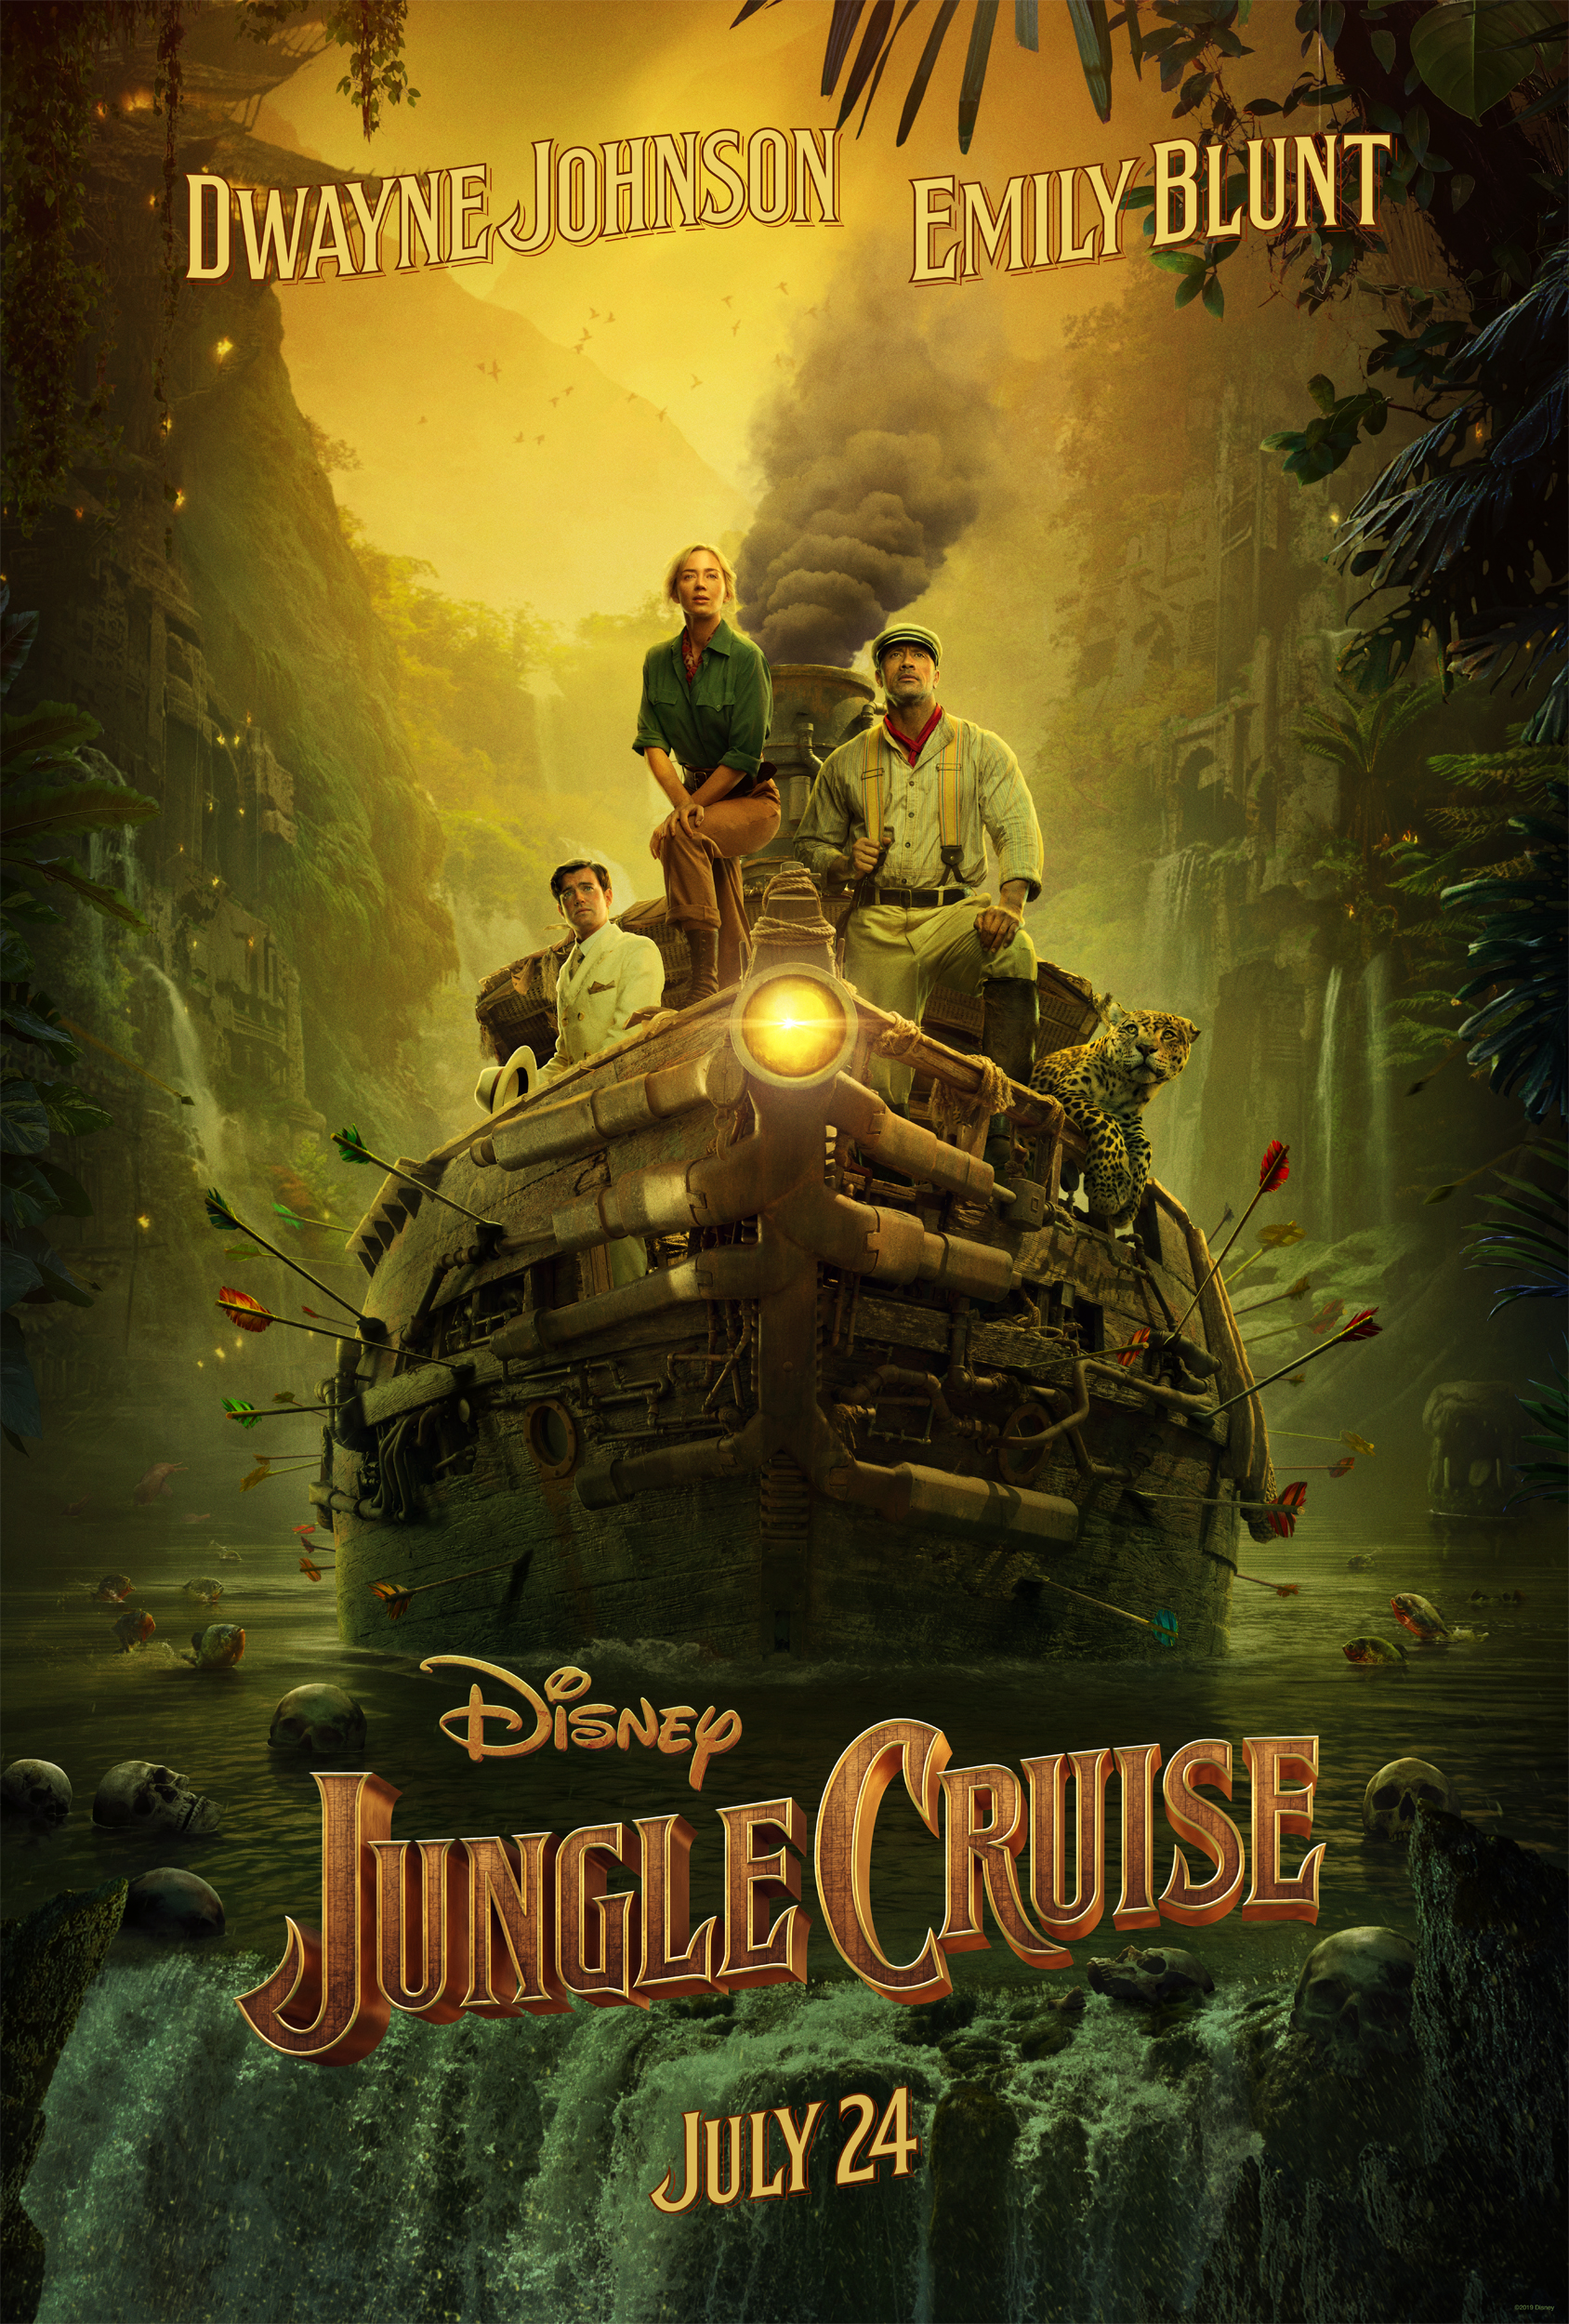 Disney's The Jungle Cruise Poster